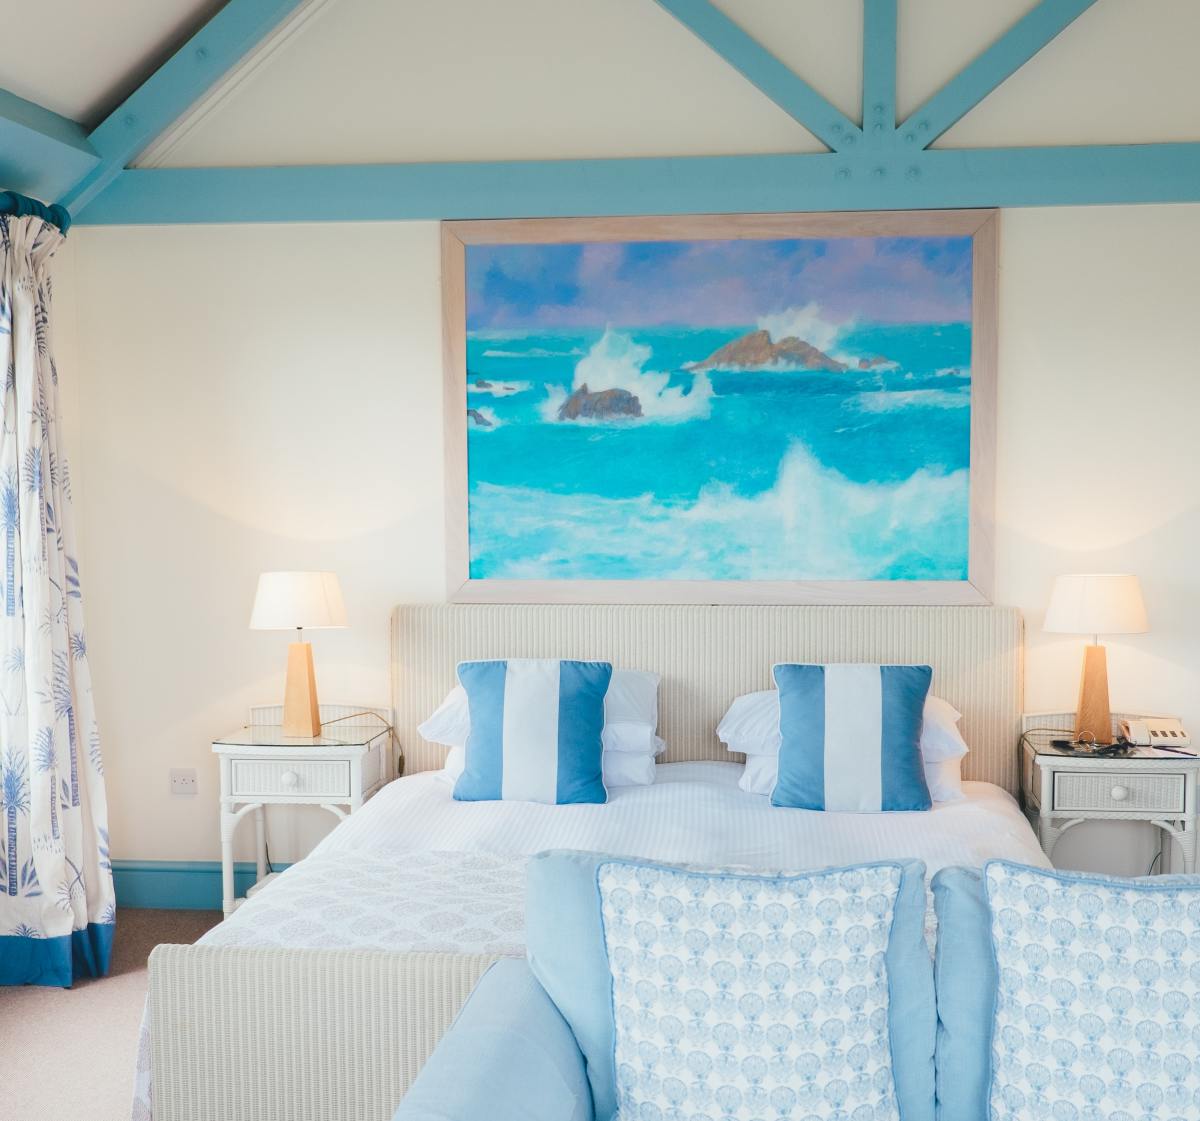 A bedroom with coastal themes is perfect for someone with a Pisces sun sign. Blue and white are an excellent combo for bedrooms because the colors are calming and clean.